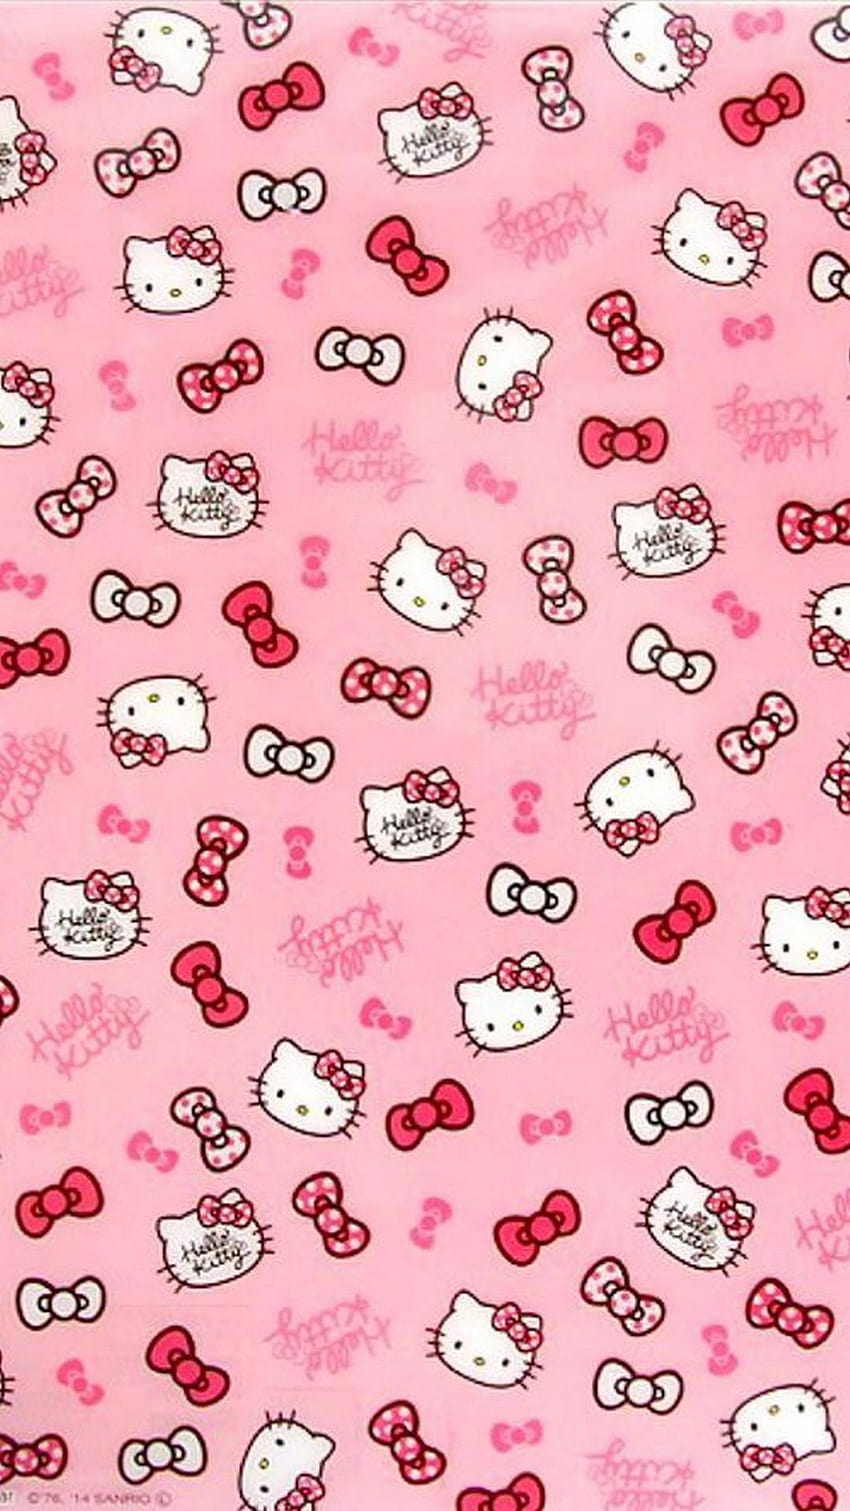 20 Cute Hello Kitty Wallpaper Ideas  Soft Pink Background  Idea Wallpapers   iPhone WallpapersColor Schemes